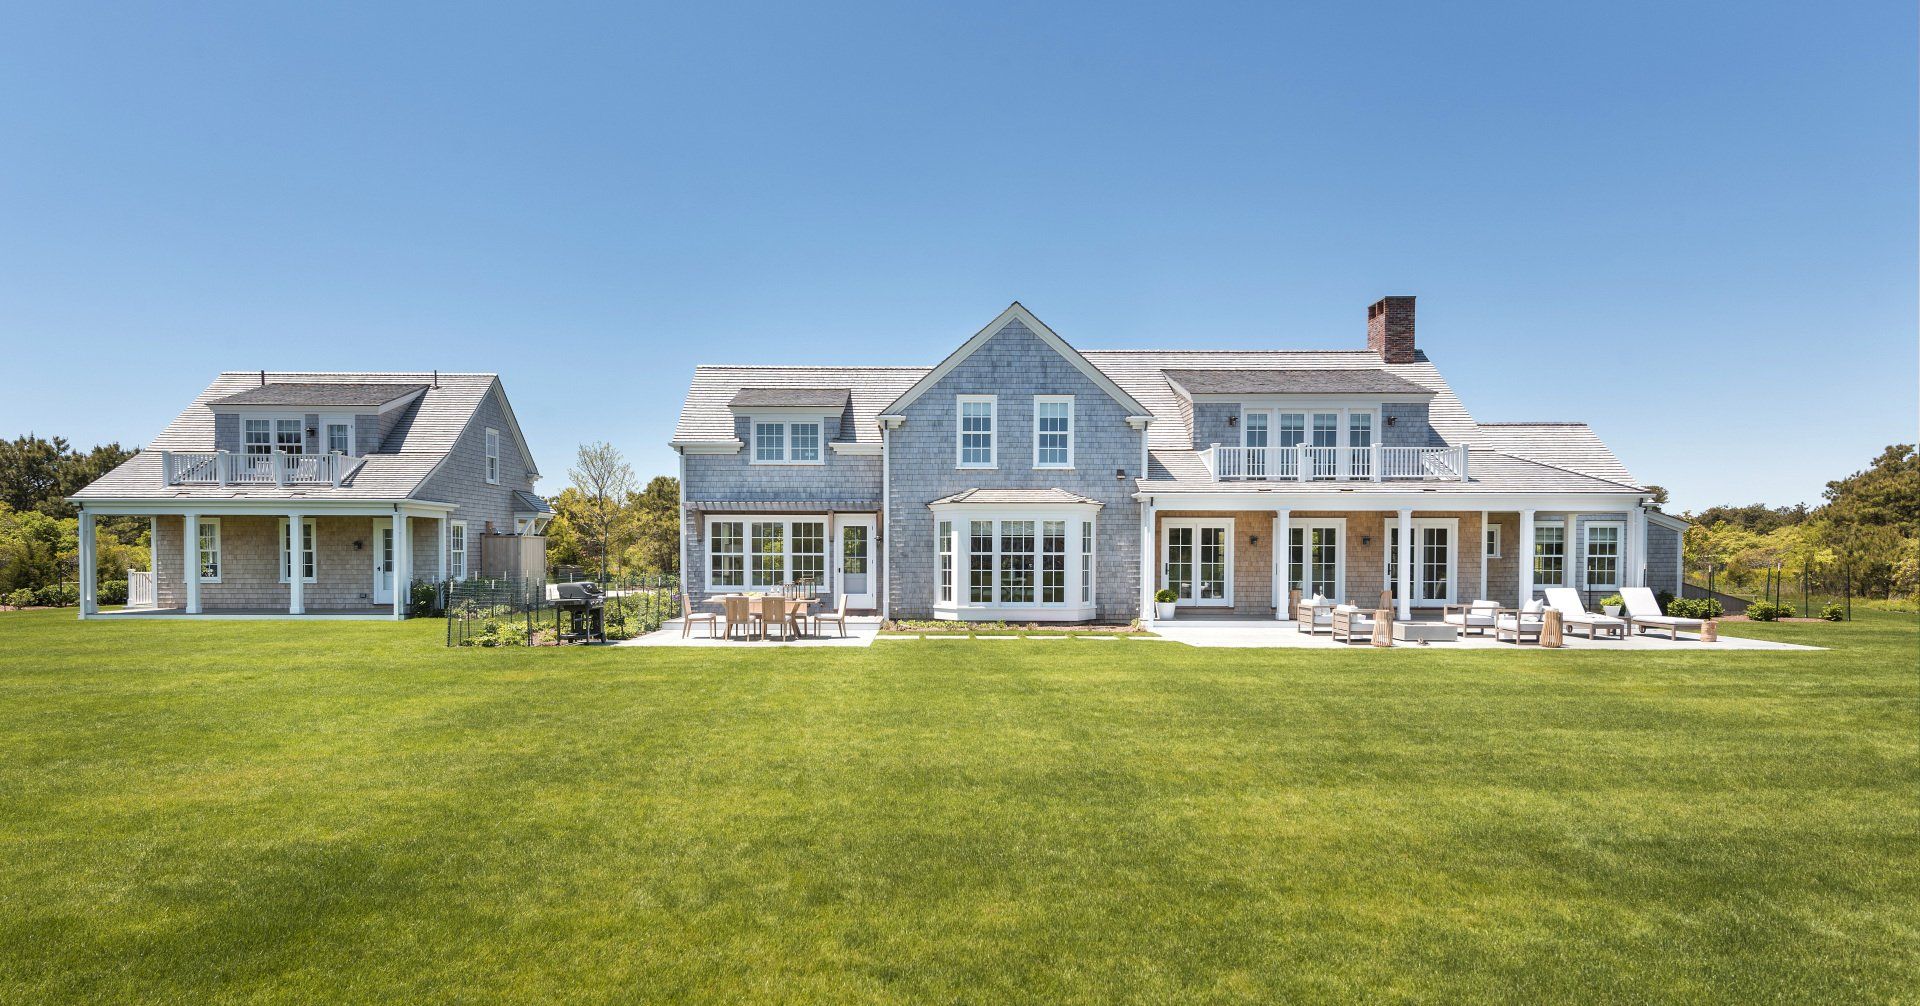 Morning and evening view of Nantucket home exterior